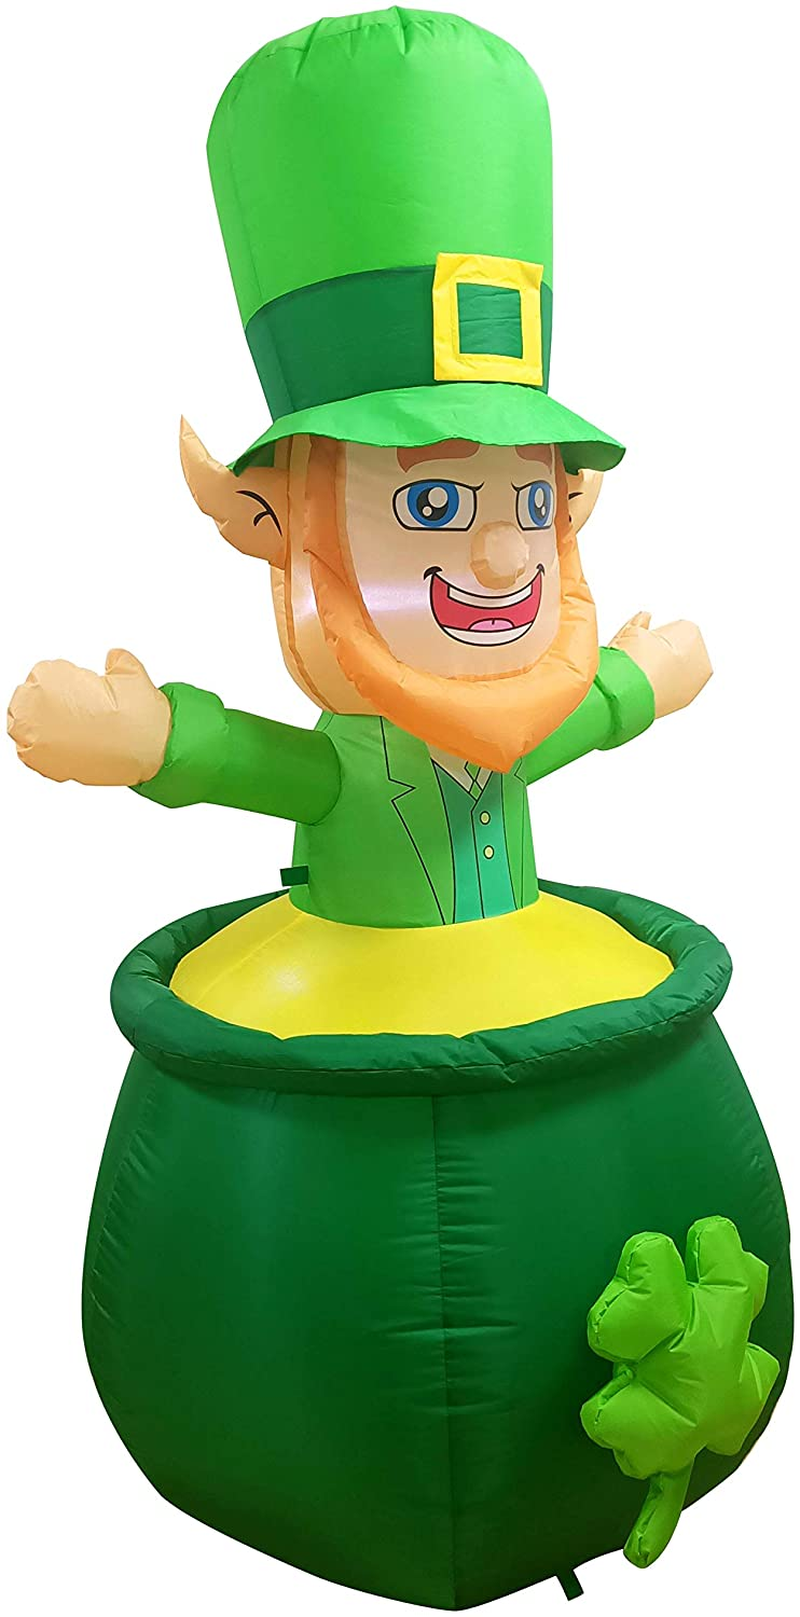 Joiedomi 6 FT St Patricks Day Inflatable Leprechaun in Cauldron Pot of Gold Coin Inflatable Yard Decorations with LED Light Build-In Arts & Entertainment > Party & Celebration > Party Supplies Joiedomi   